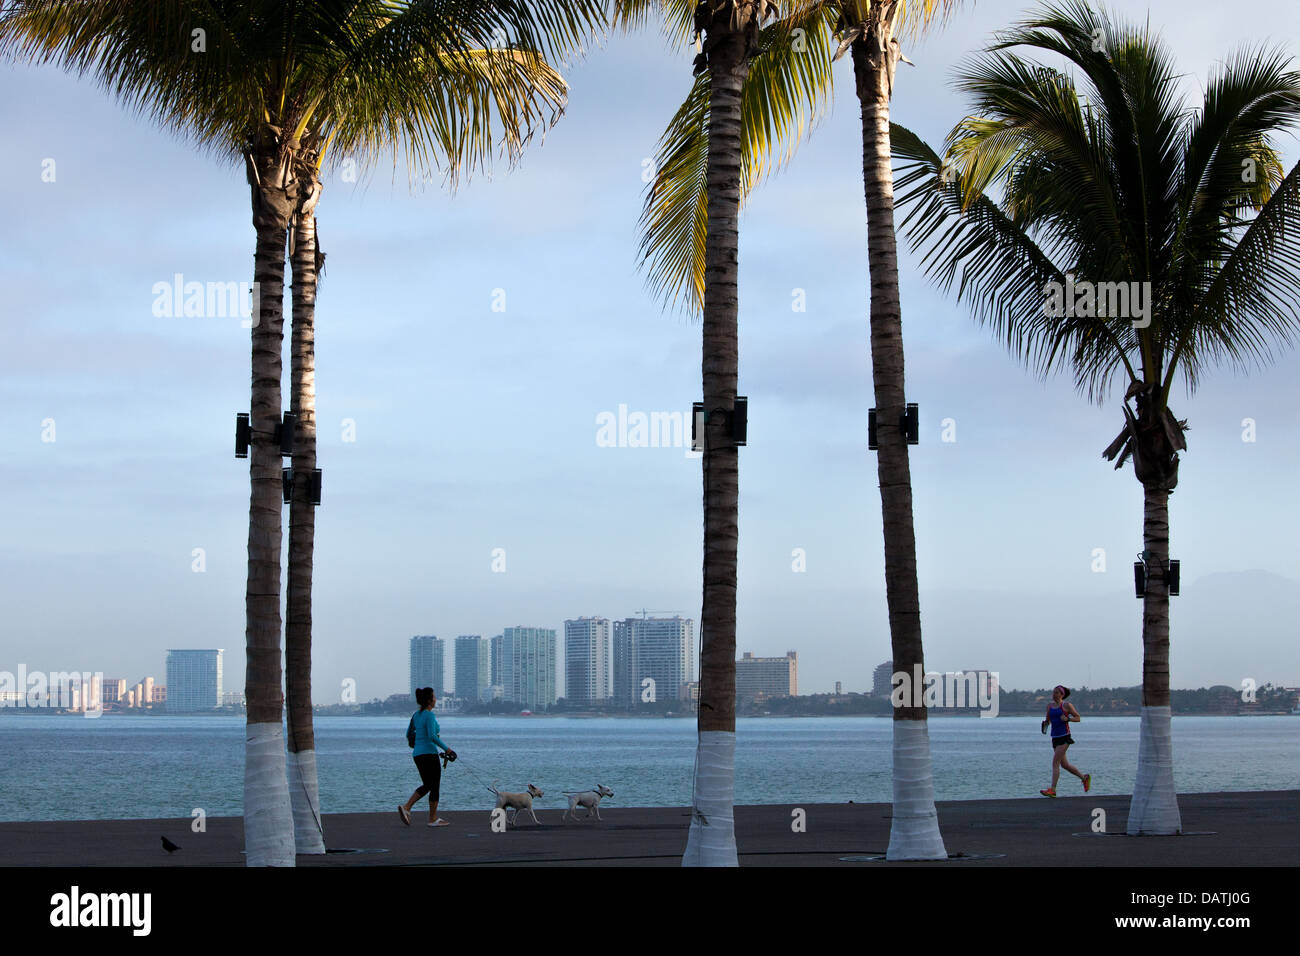 Runners and walkers on the Puerto Vallarta boardwalk at sunrise, Mexico. Stock Photo